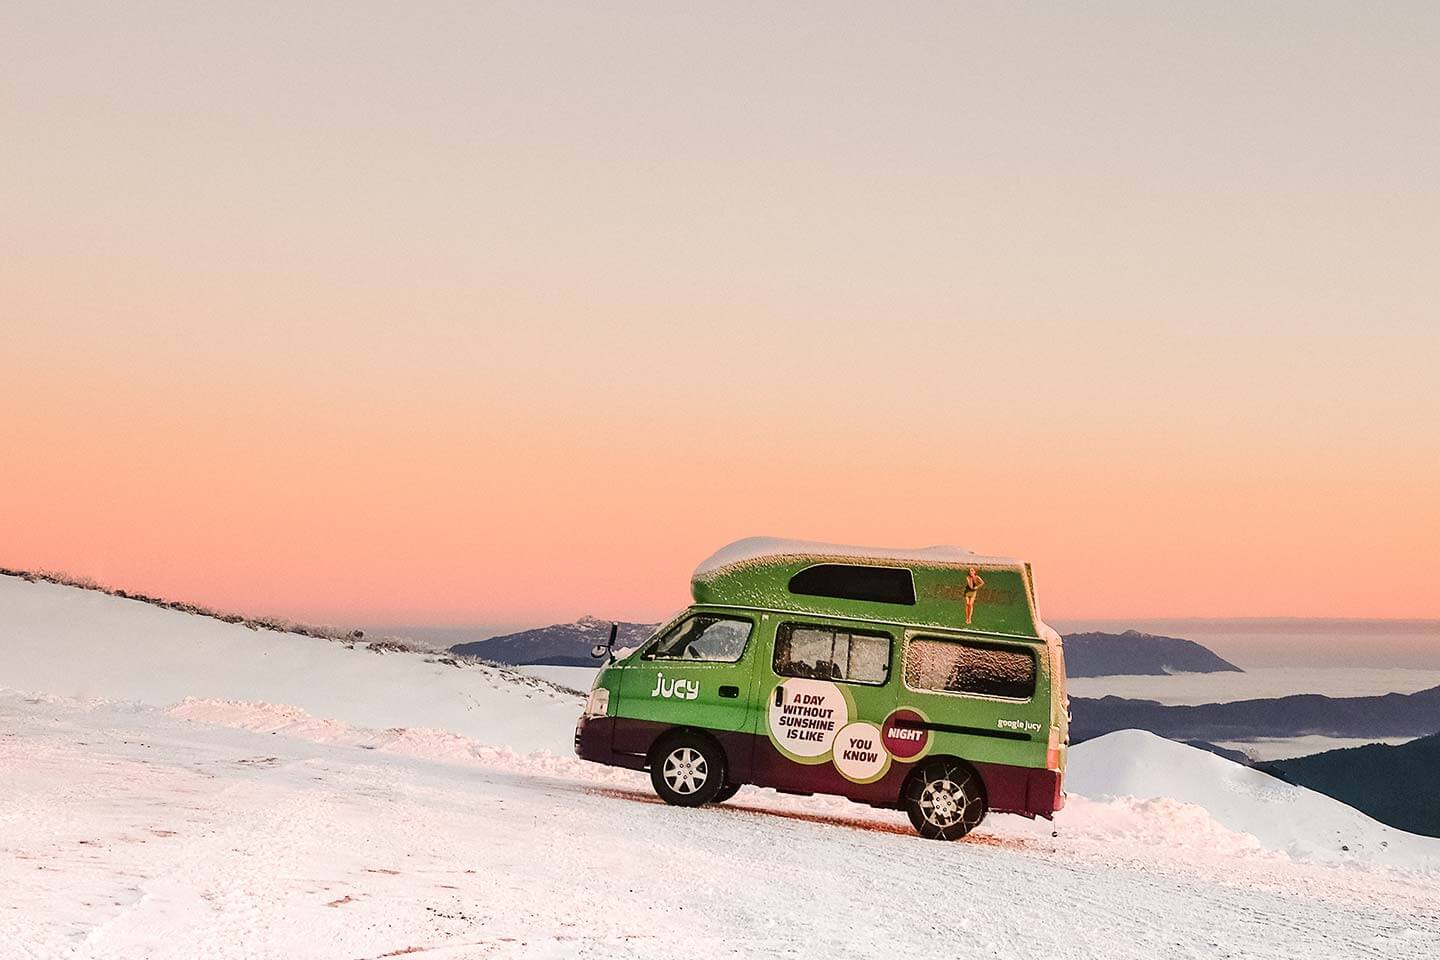 A JUCY van rental in the snow - premium choice for budget campervan hire in New Zealand and Australia